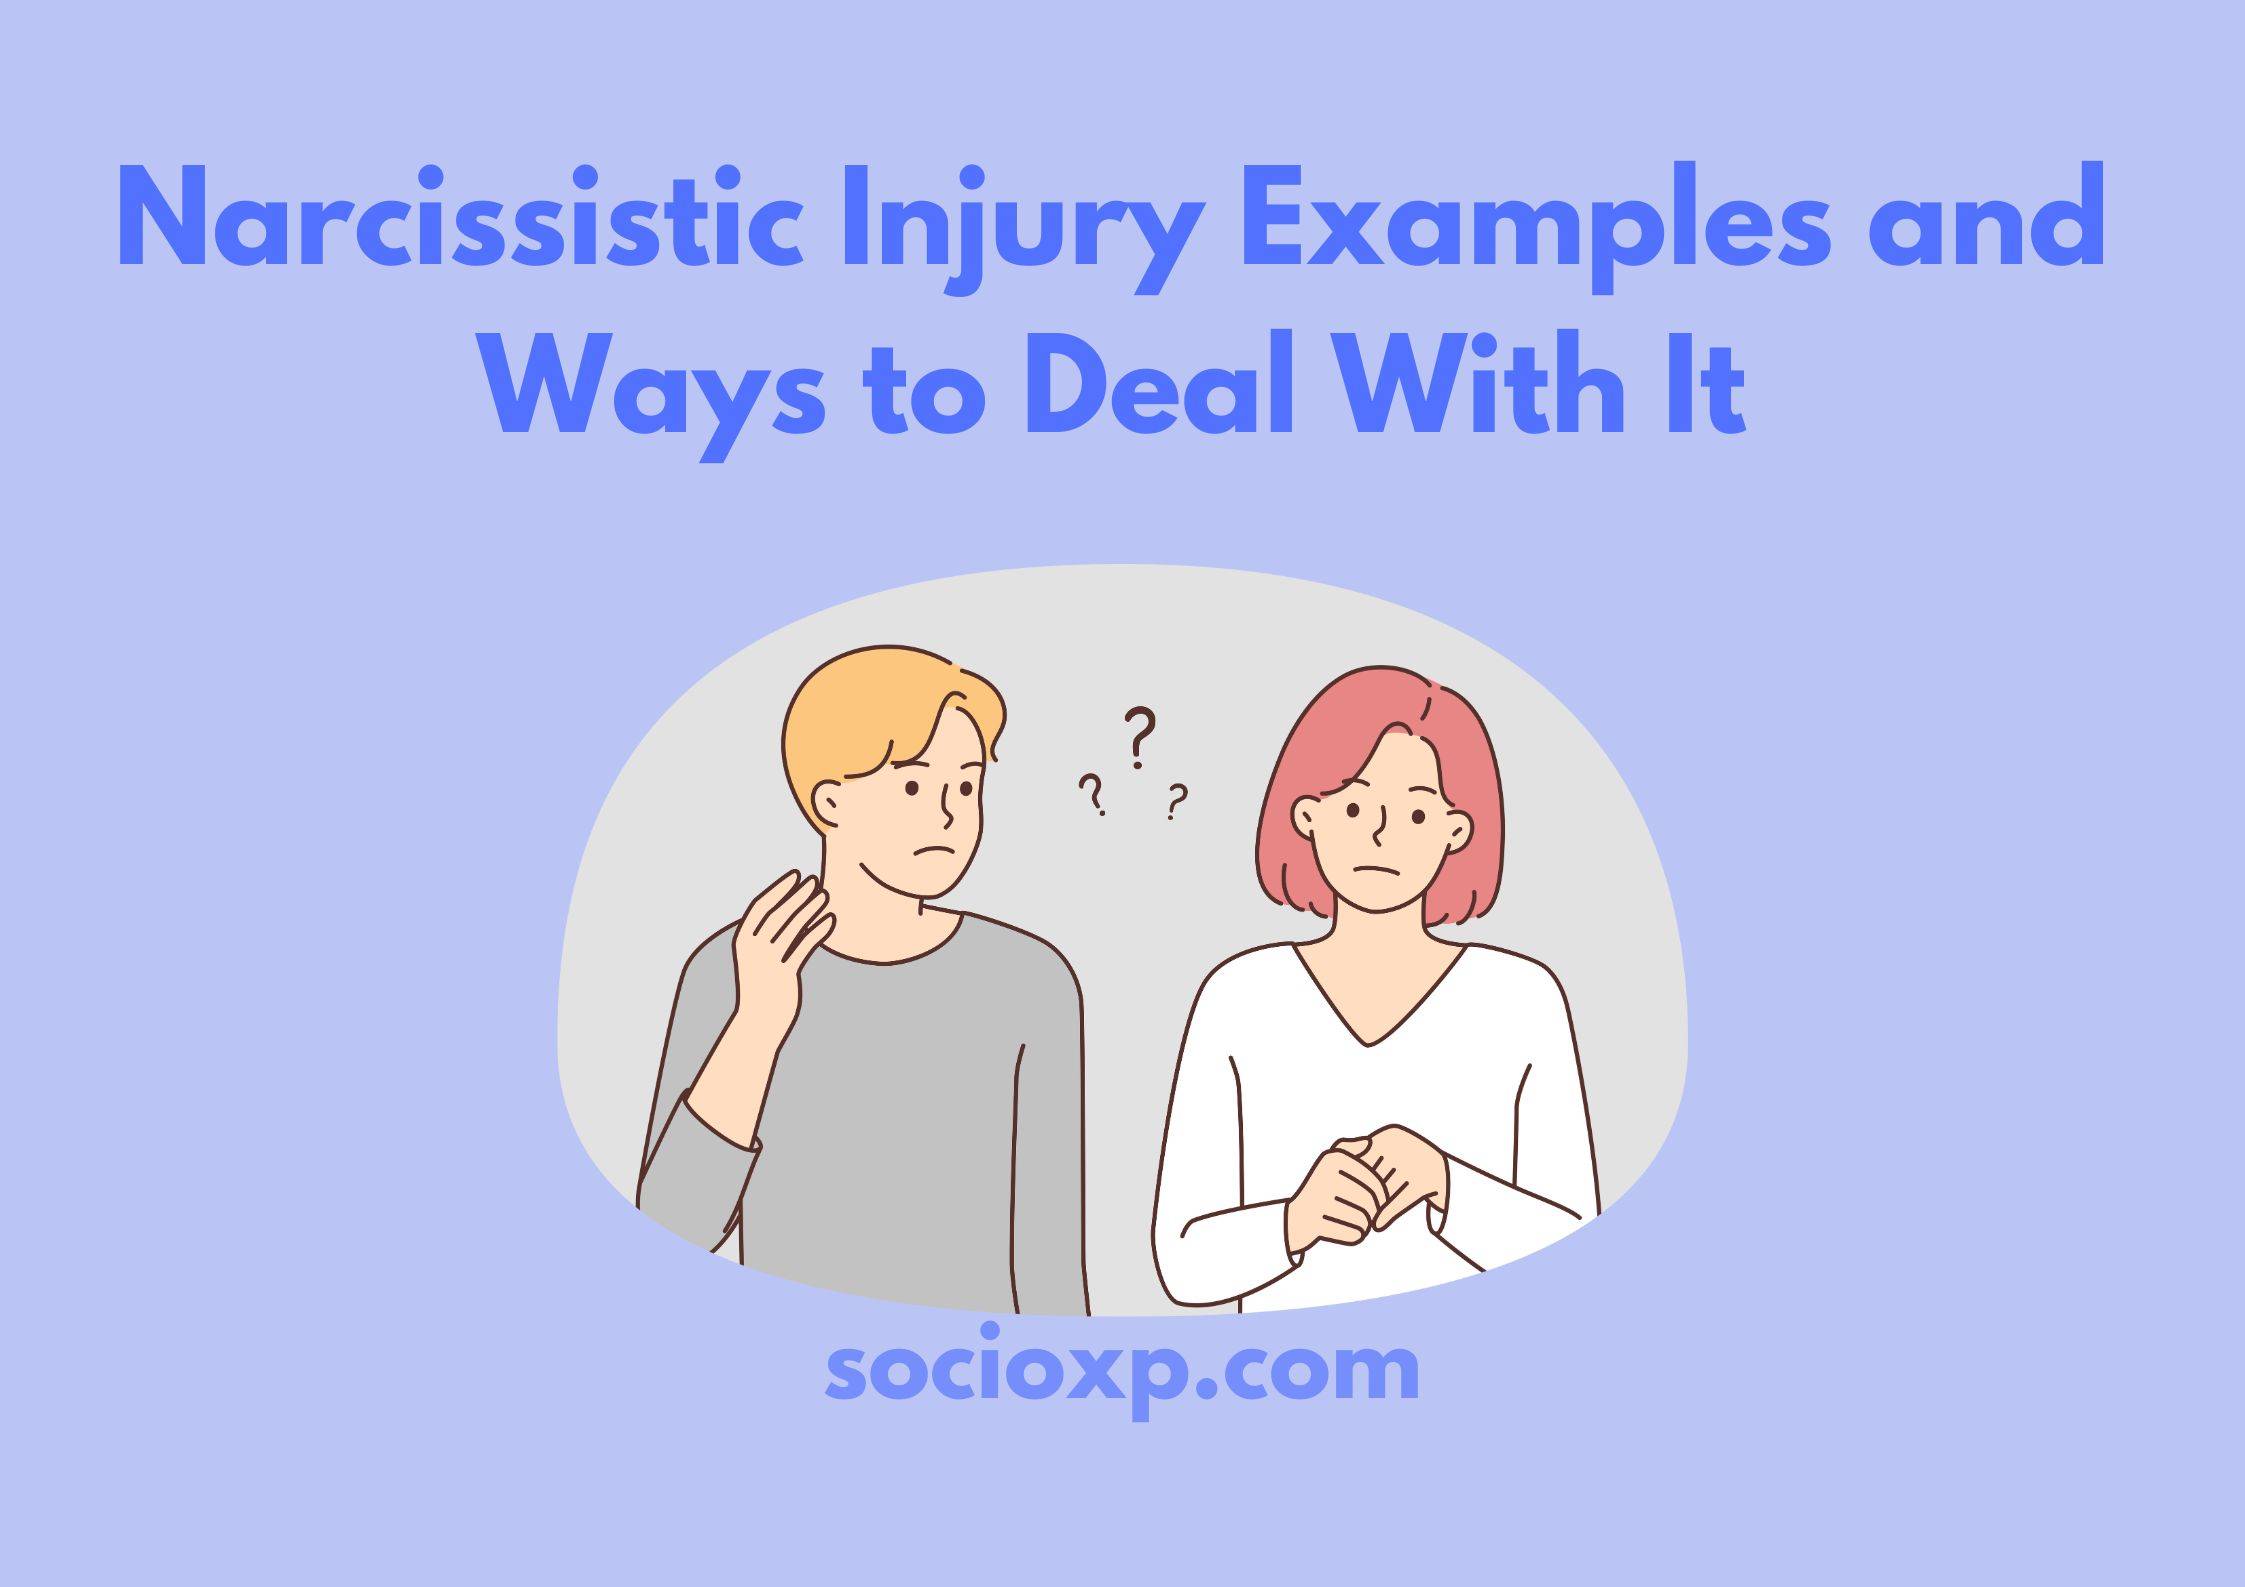 Narcissistic Injury Examples and Ways to Deal With It